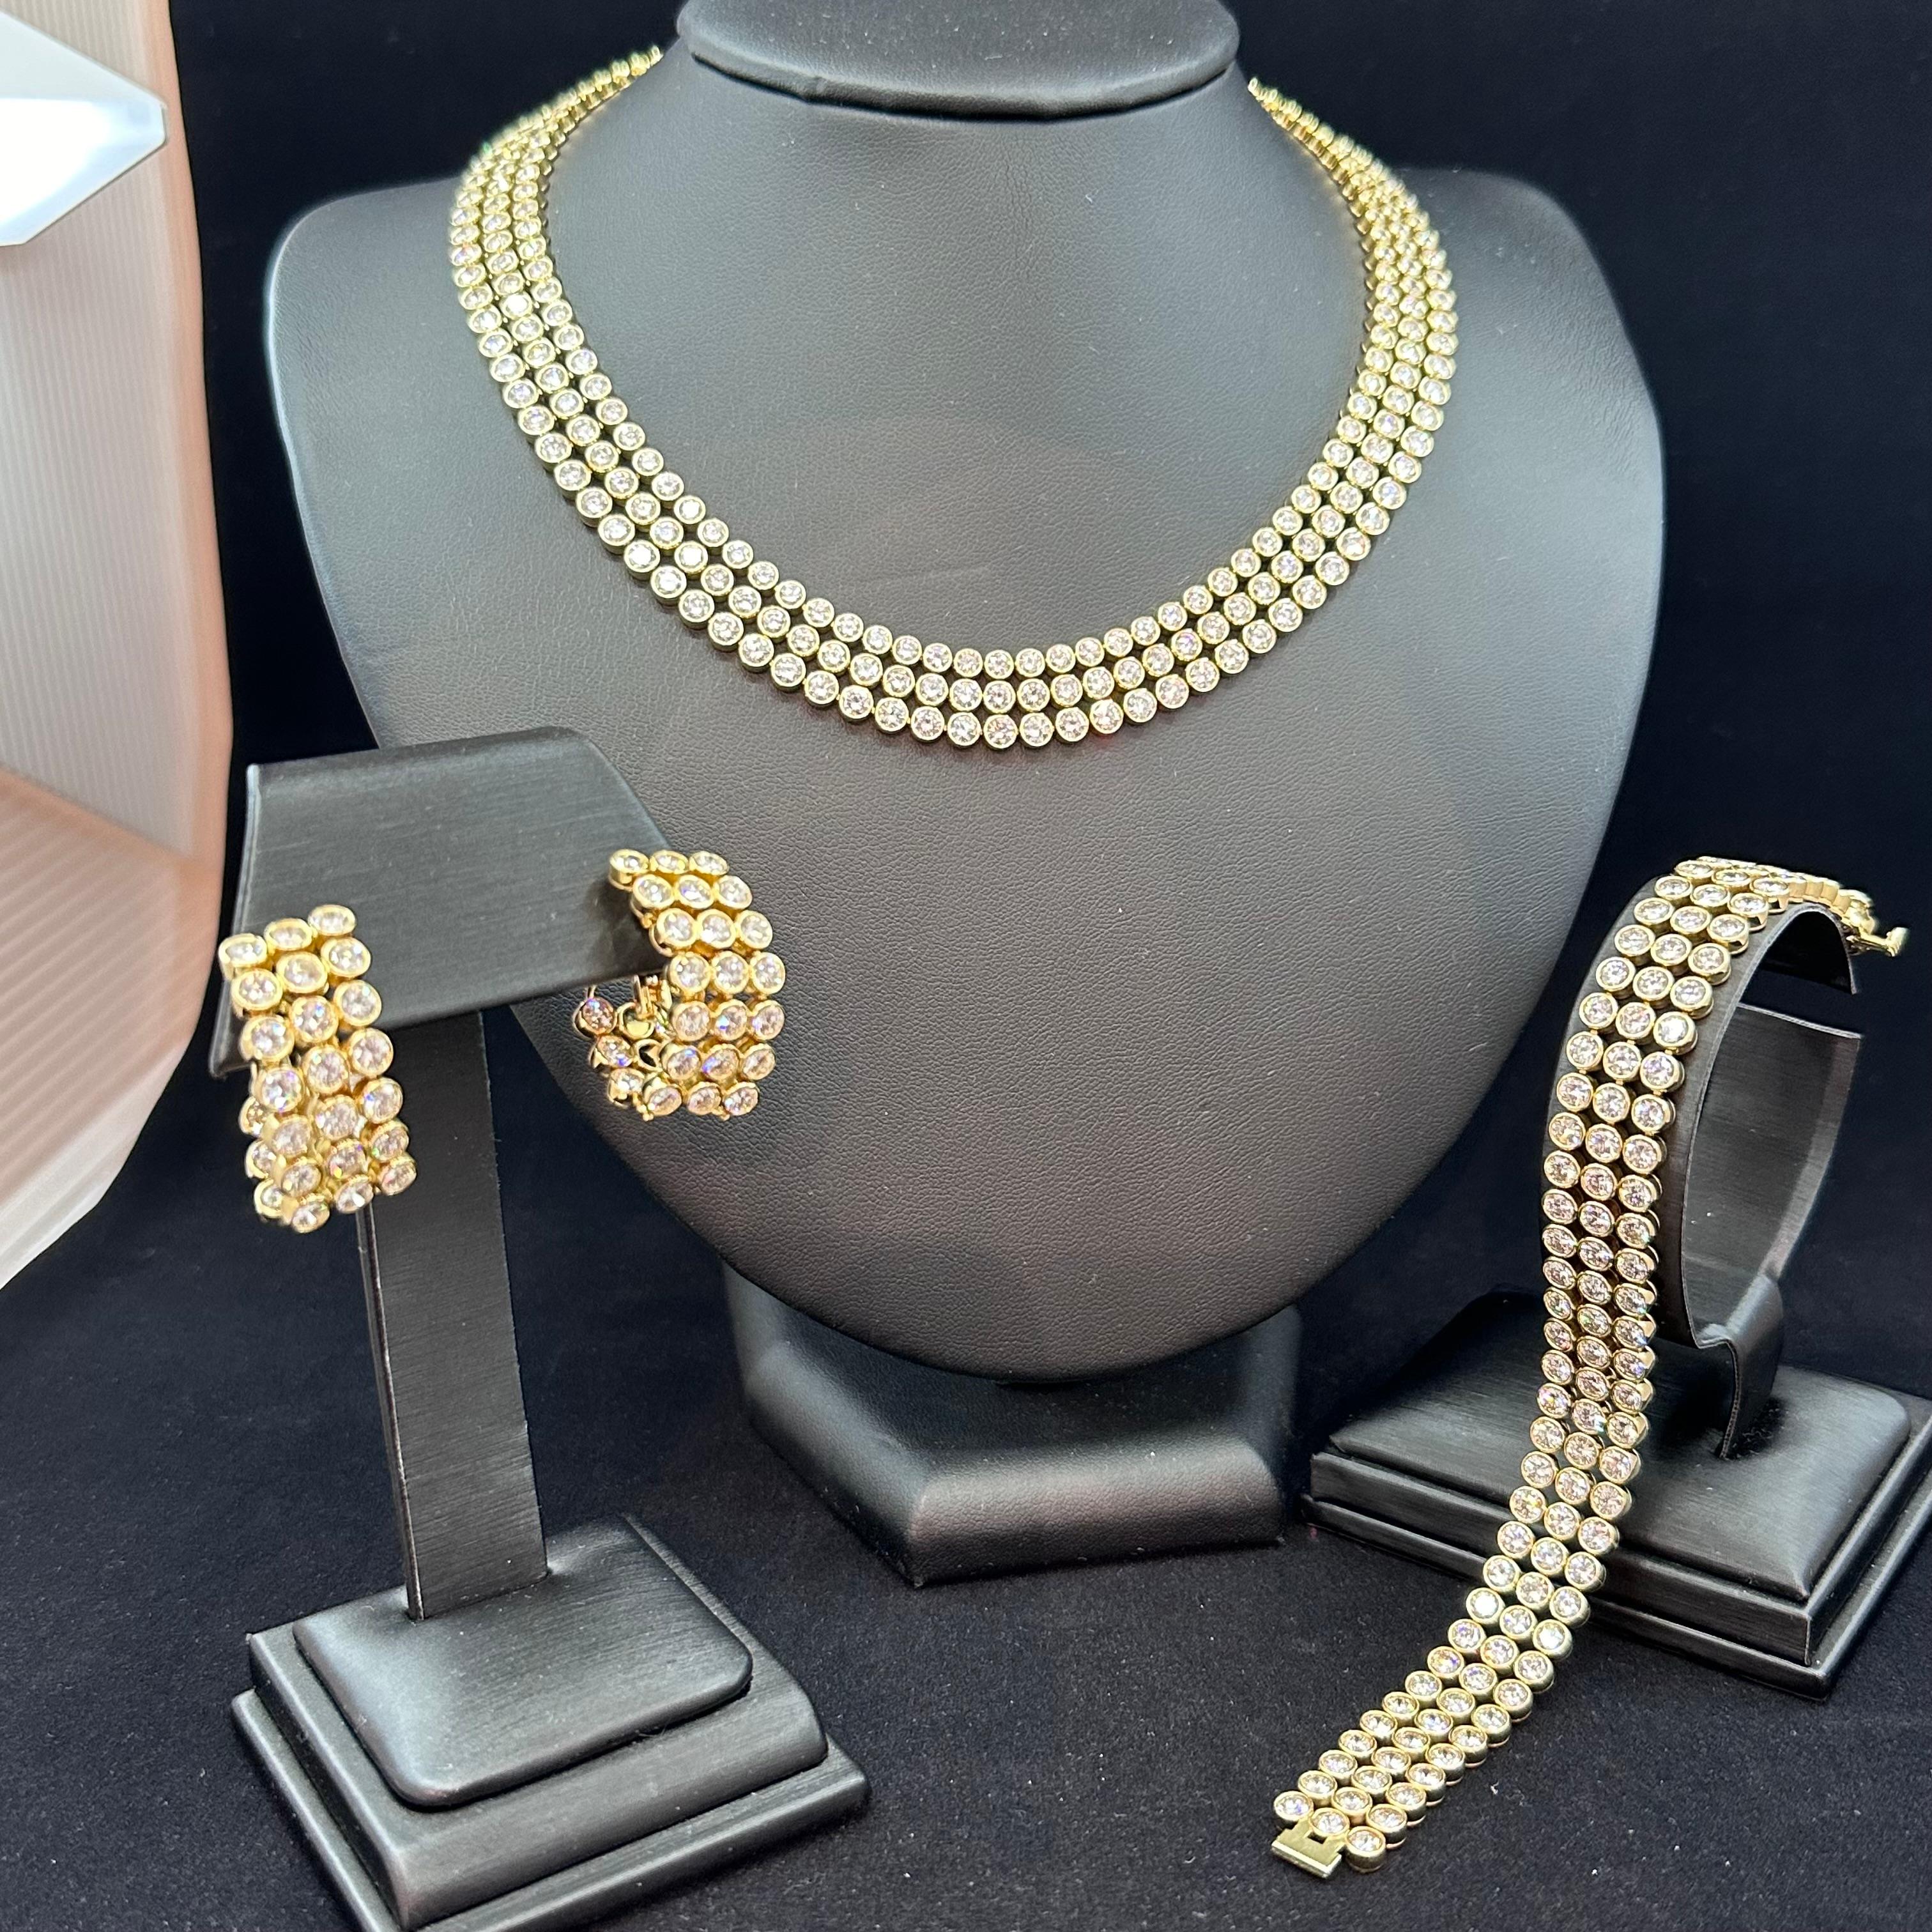 Harry Winston Diamond Necklace Bracelet & Earrings Set 18k Yellow Gold In Excellent Condition For Sale In Beverly Hills, CA